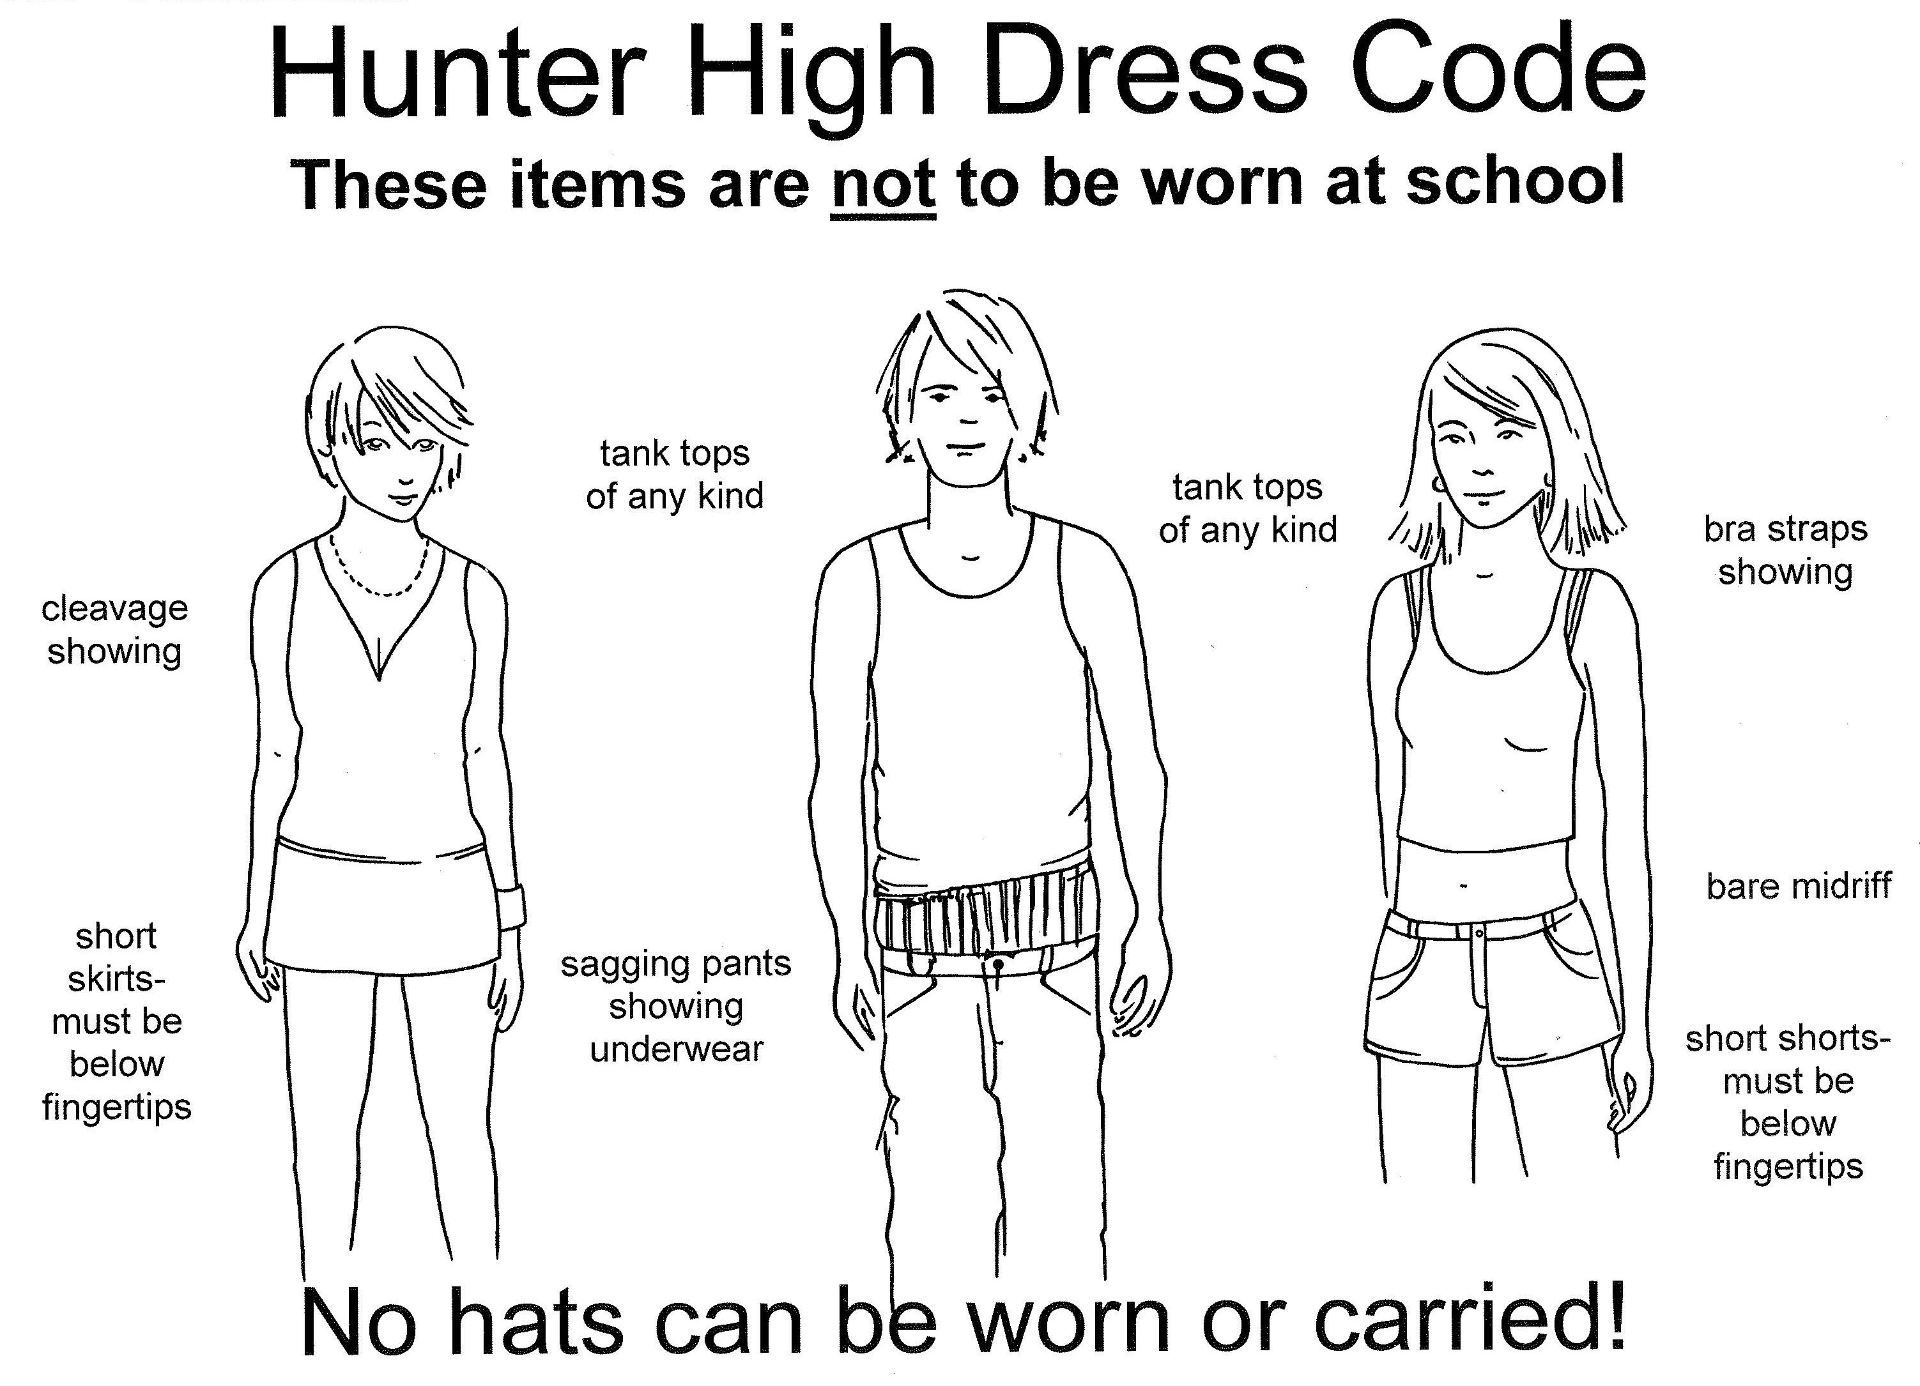 types of dress codes